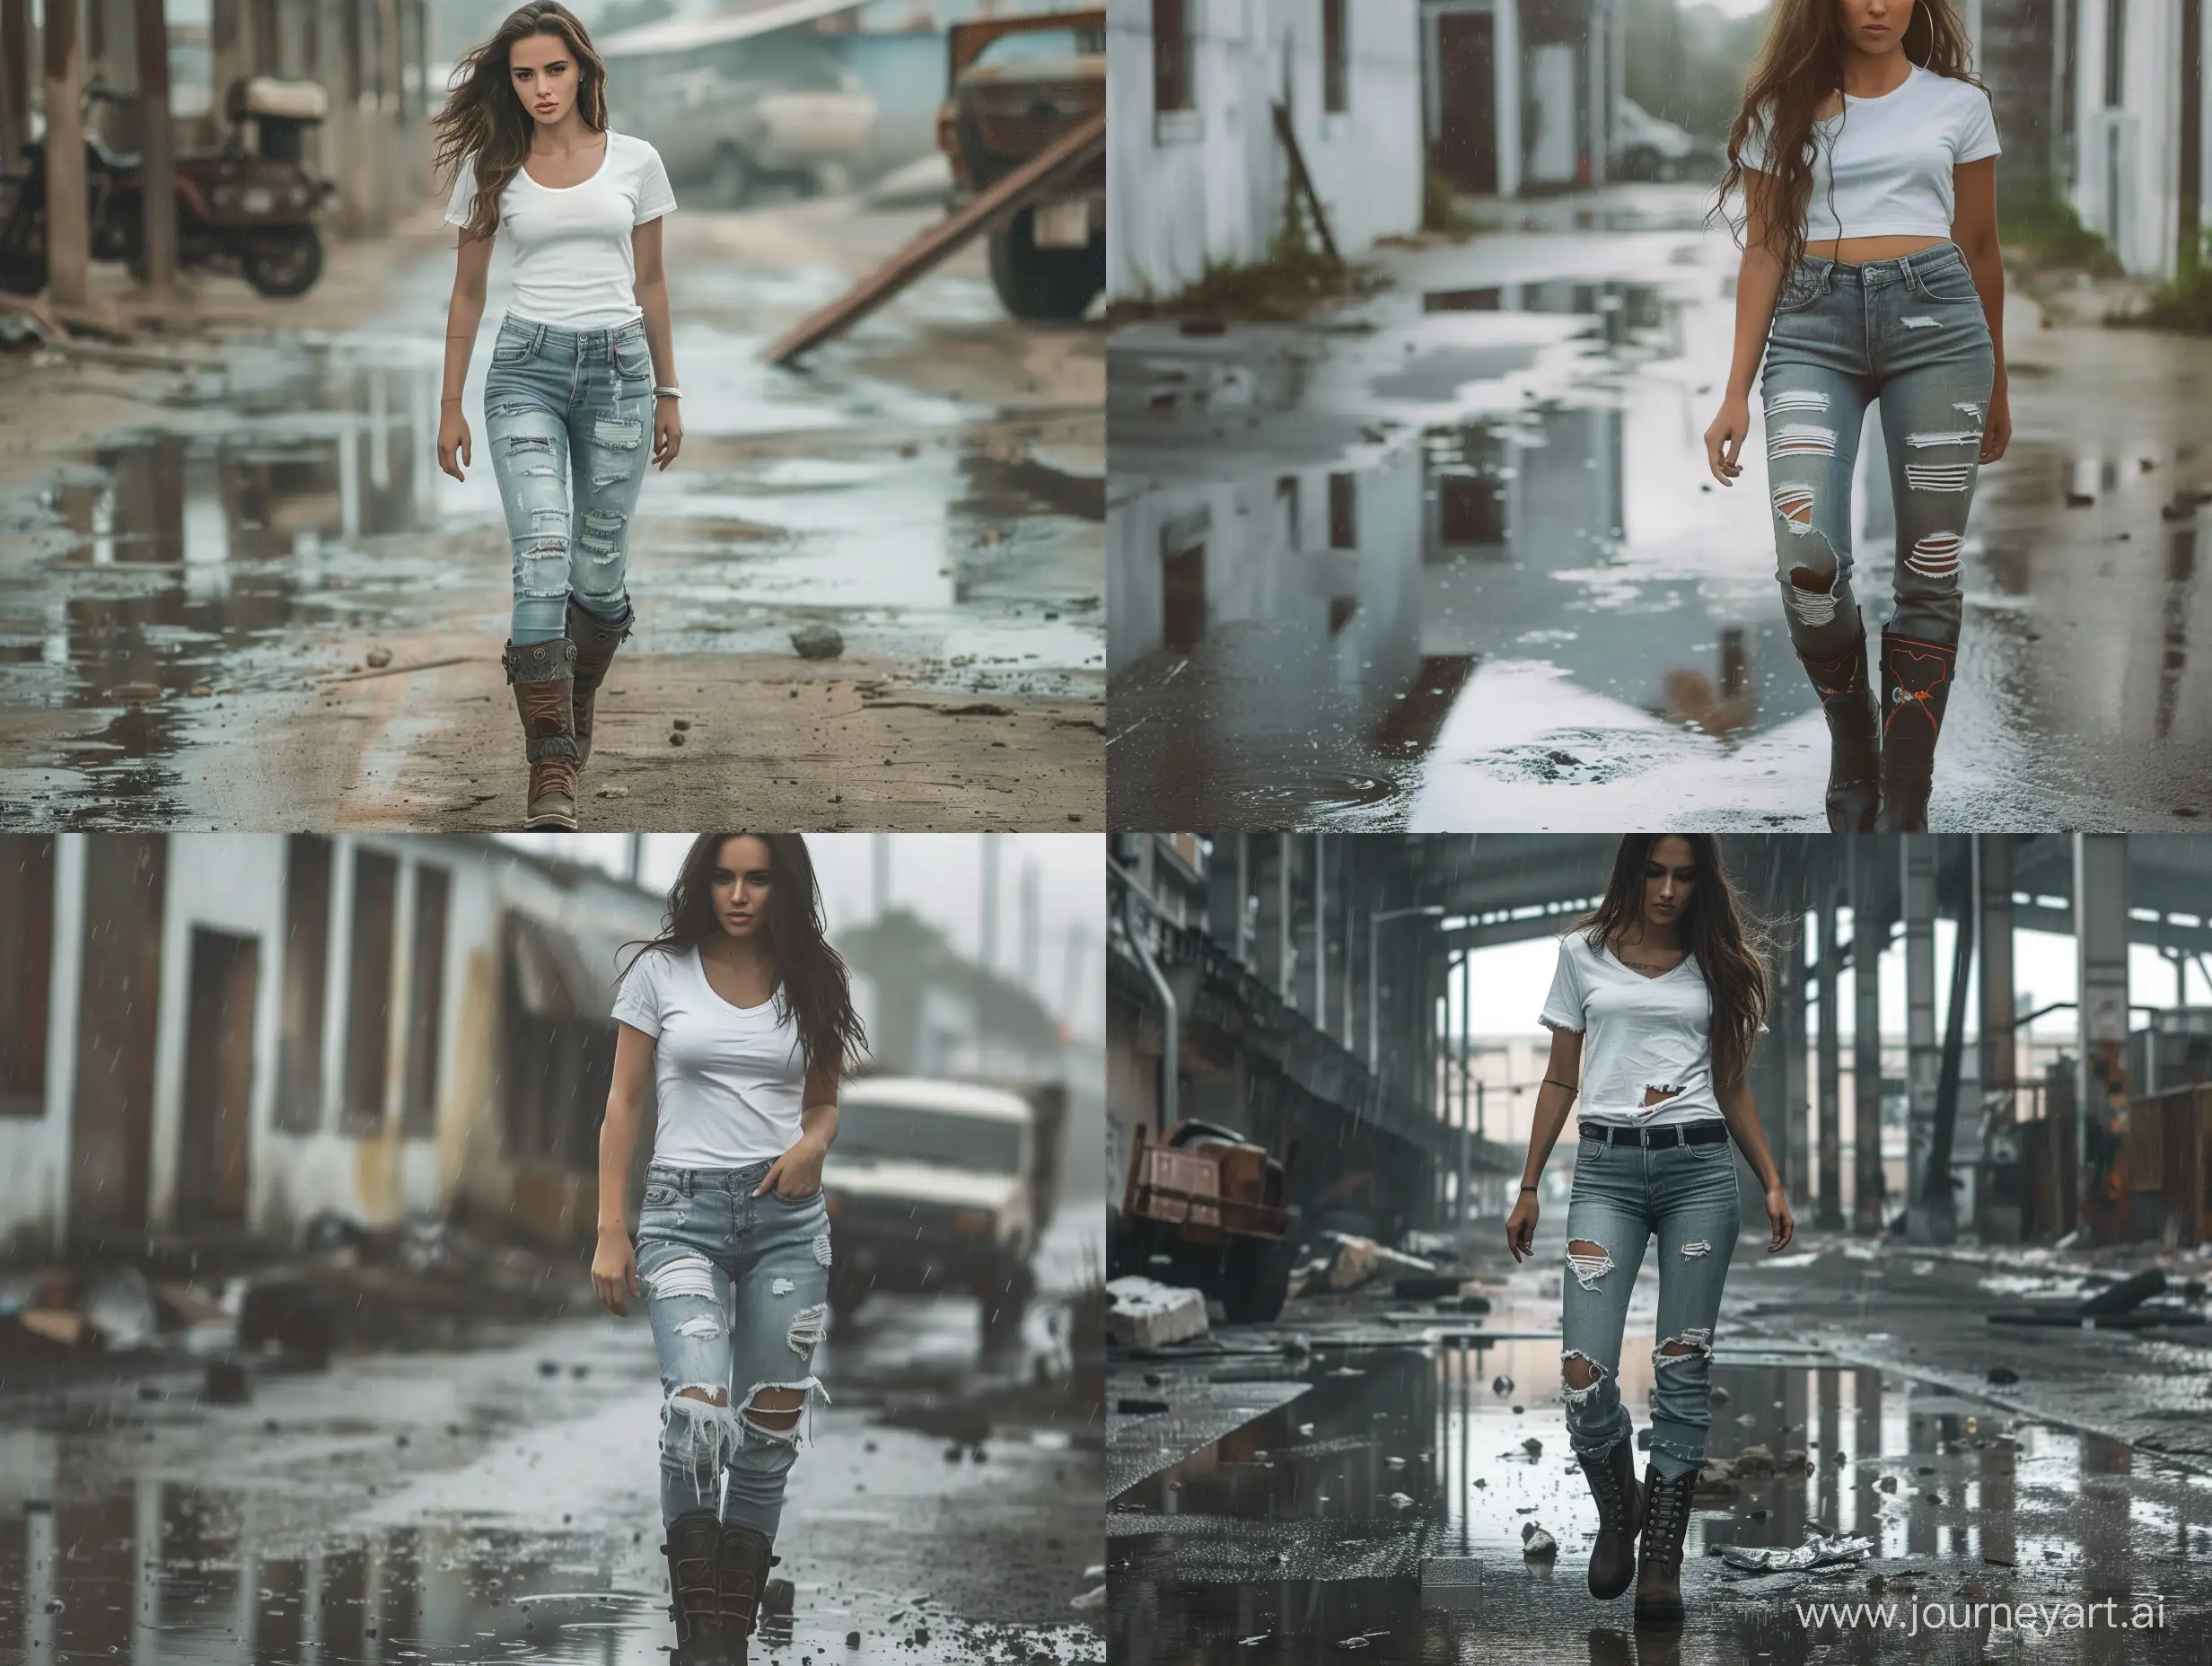 badraggled beautiful fit young woman wearing a white t shirt denim jeans and motorcycle boots walking on a post apocalyptic street in the rain